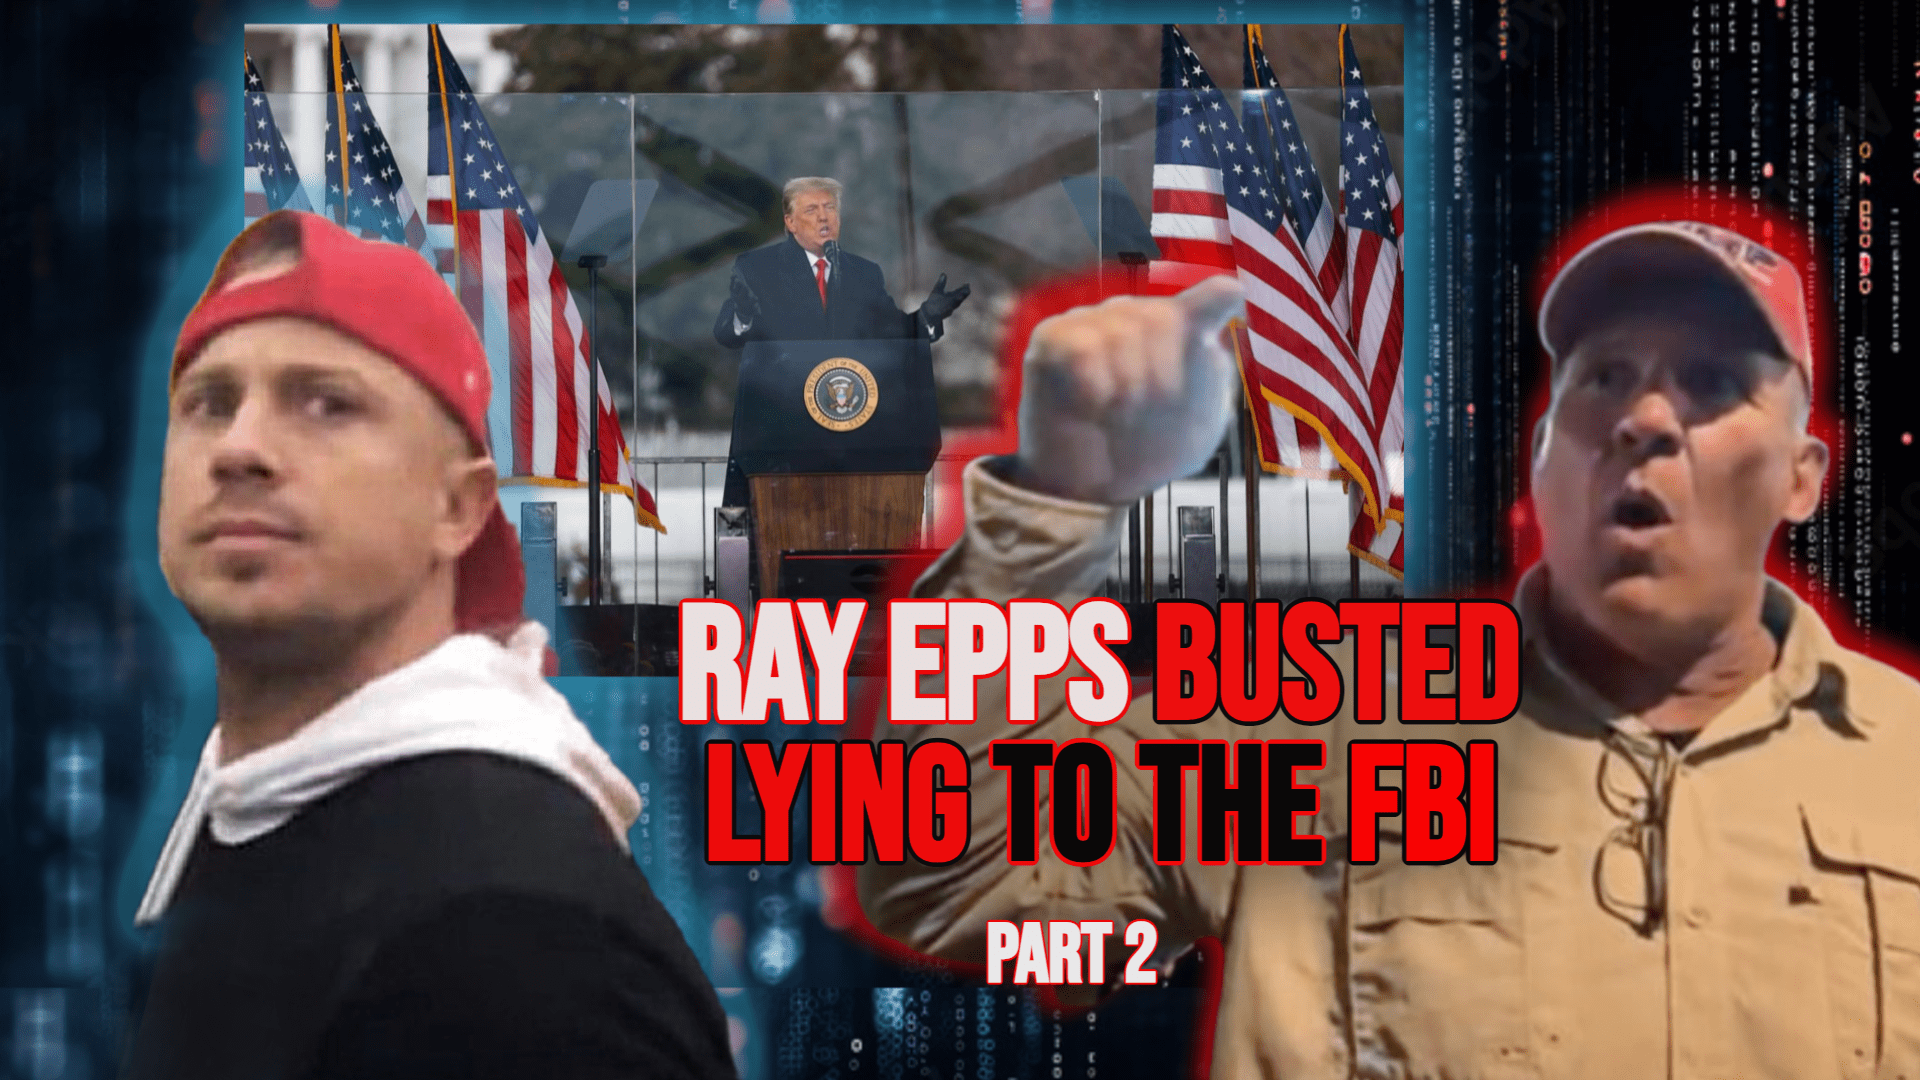 J6 Political Prisoner Ryan Samsel Exposes James Ray Epps Breaking Federal Law In Leaked FBI Call: ‘We Were Listening To The, Uh, Speech’ [Part 2]